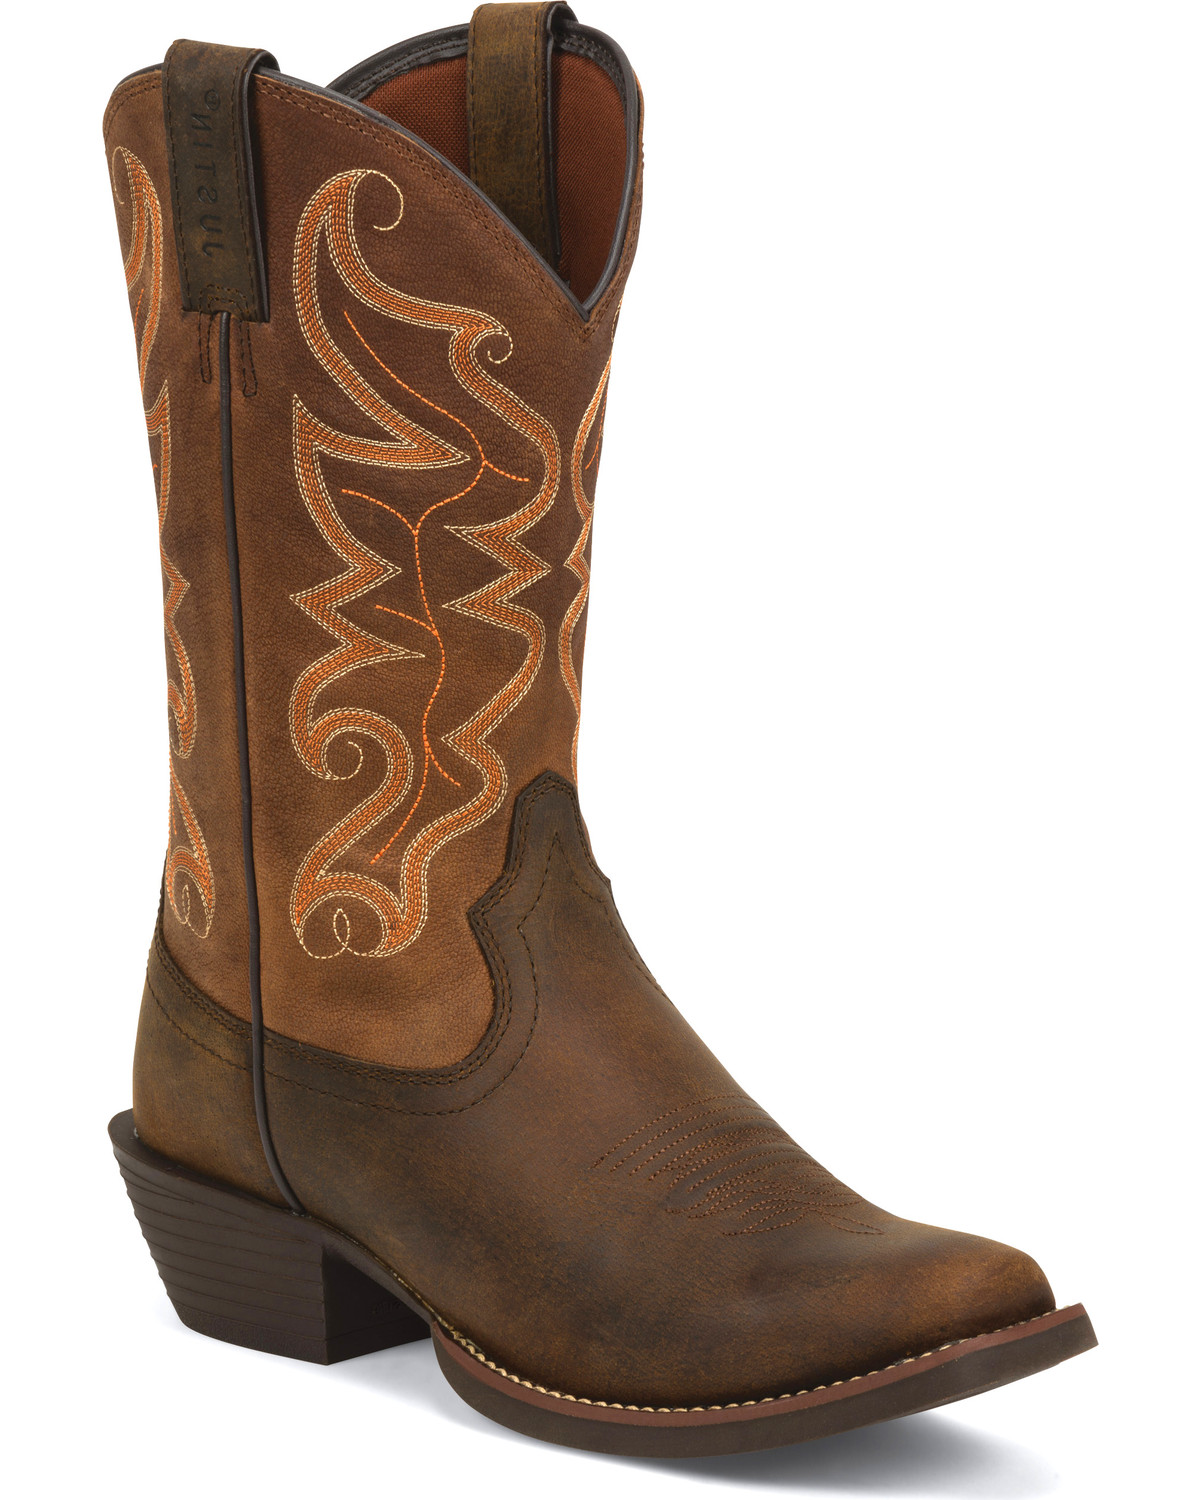 Pull-On Western Boots | Boot Barn